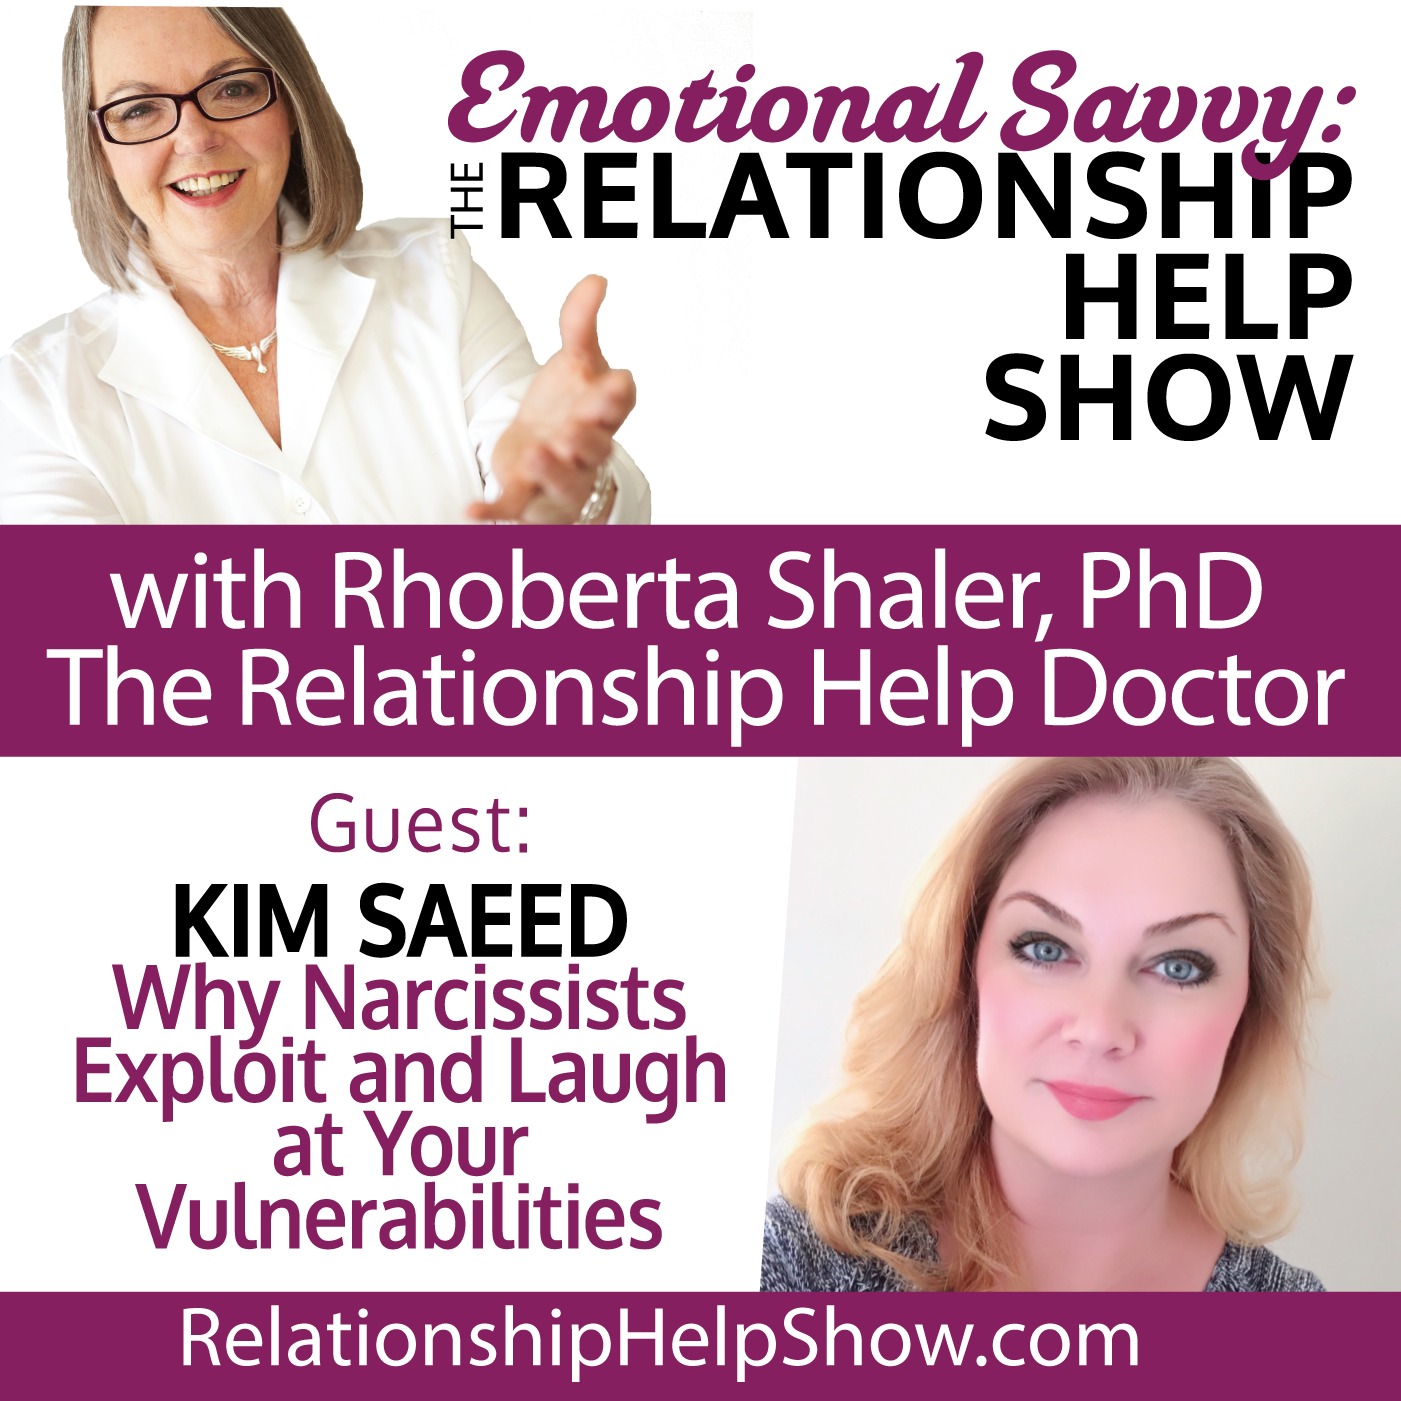 Believe Behavior! Why Narcissists Exploit & Laugh at Your Vulnerabilities GUEST - Kim Saeed